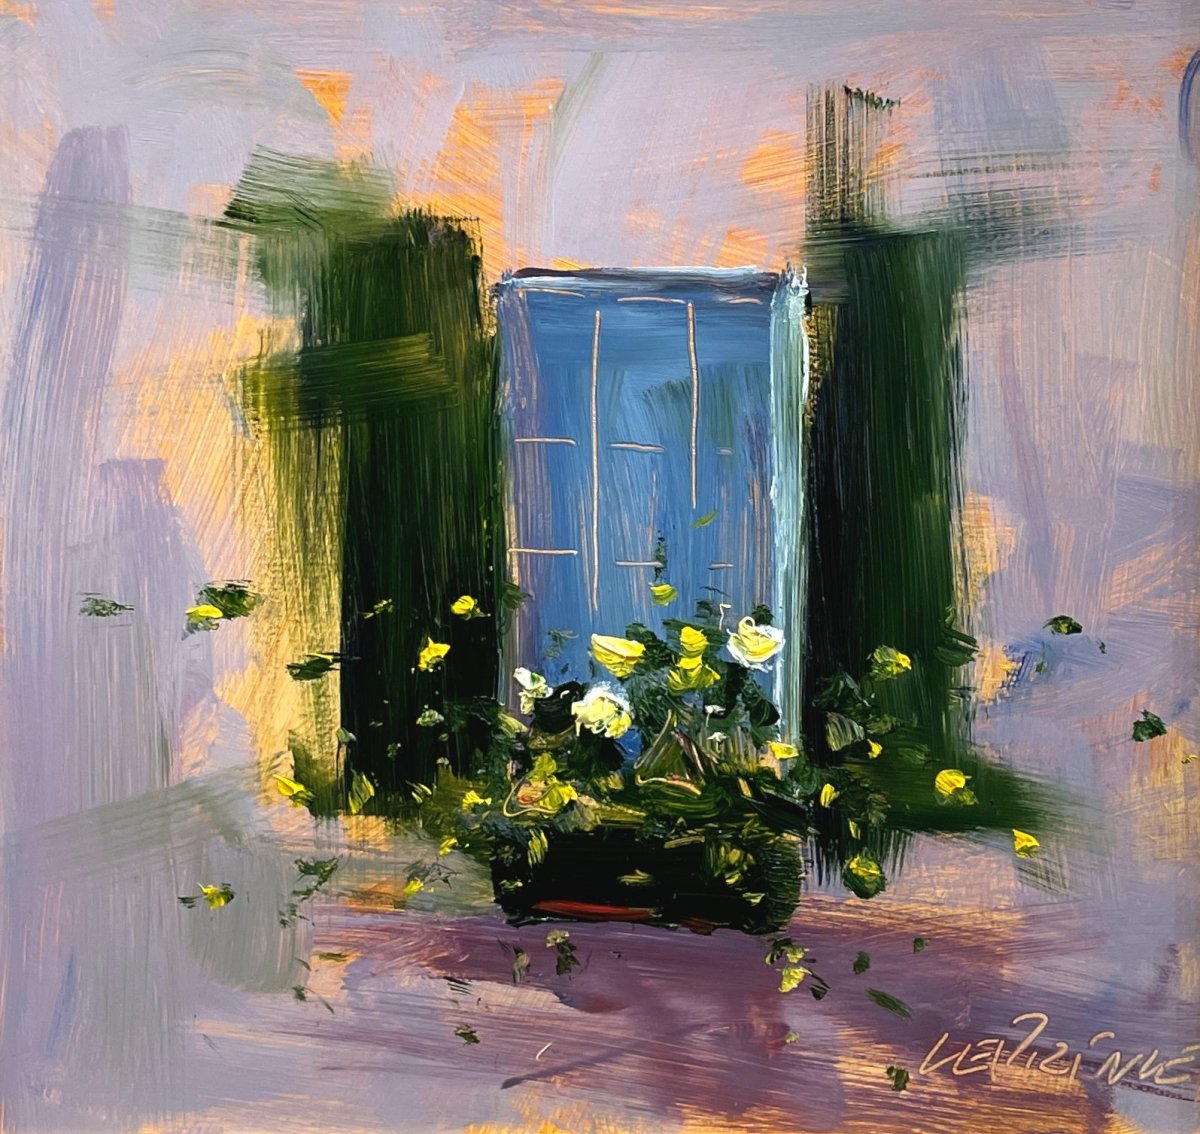 Window Box Study I by Kevin LePrince at LePrince Galleries